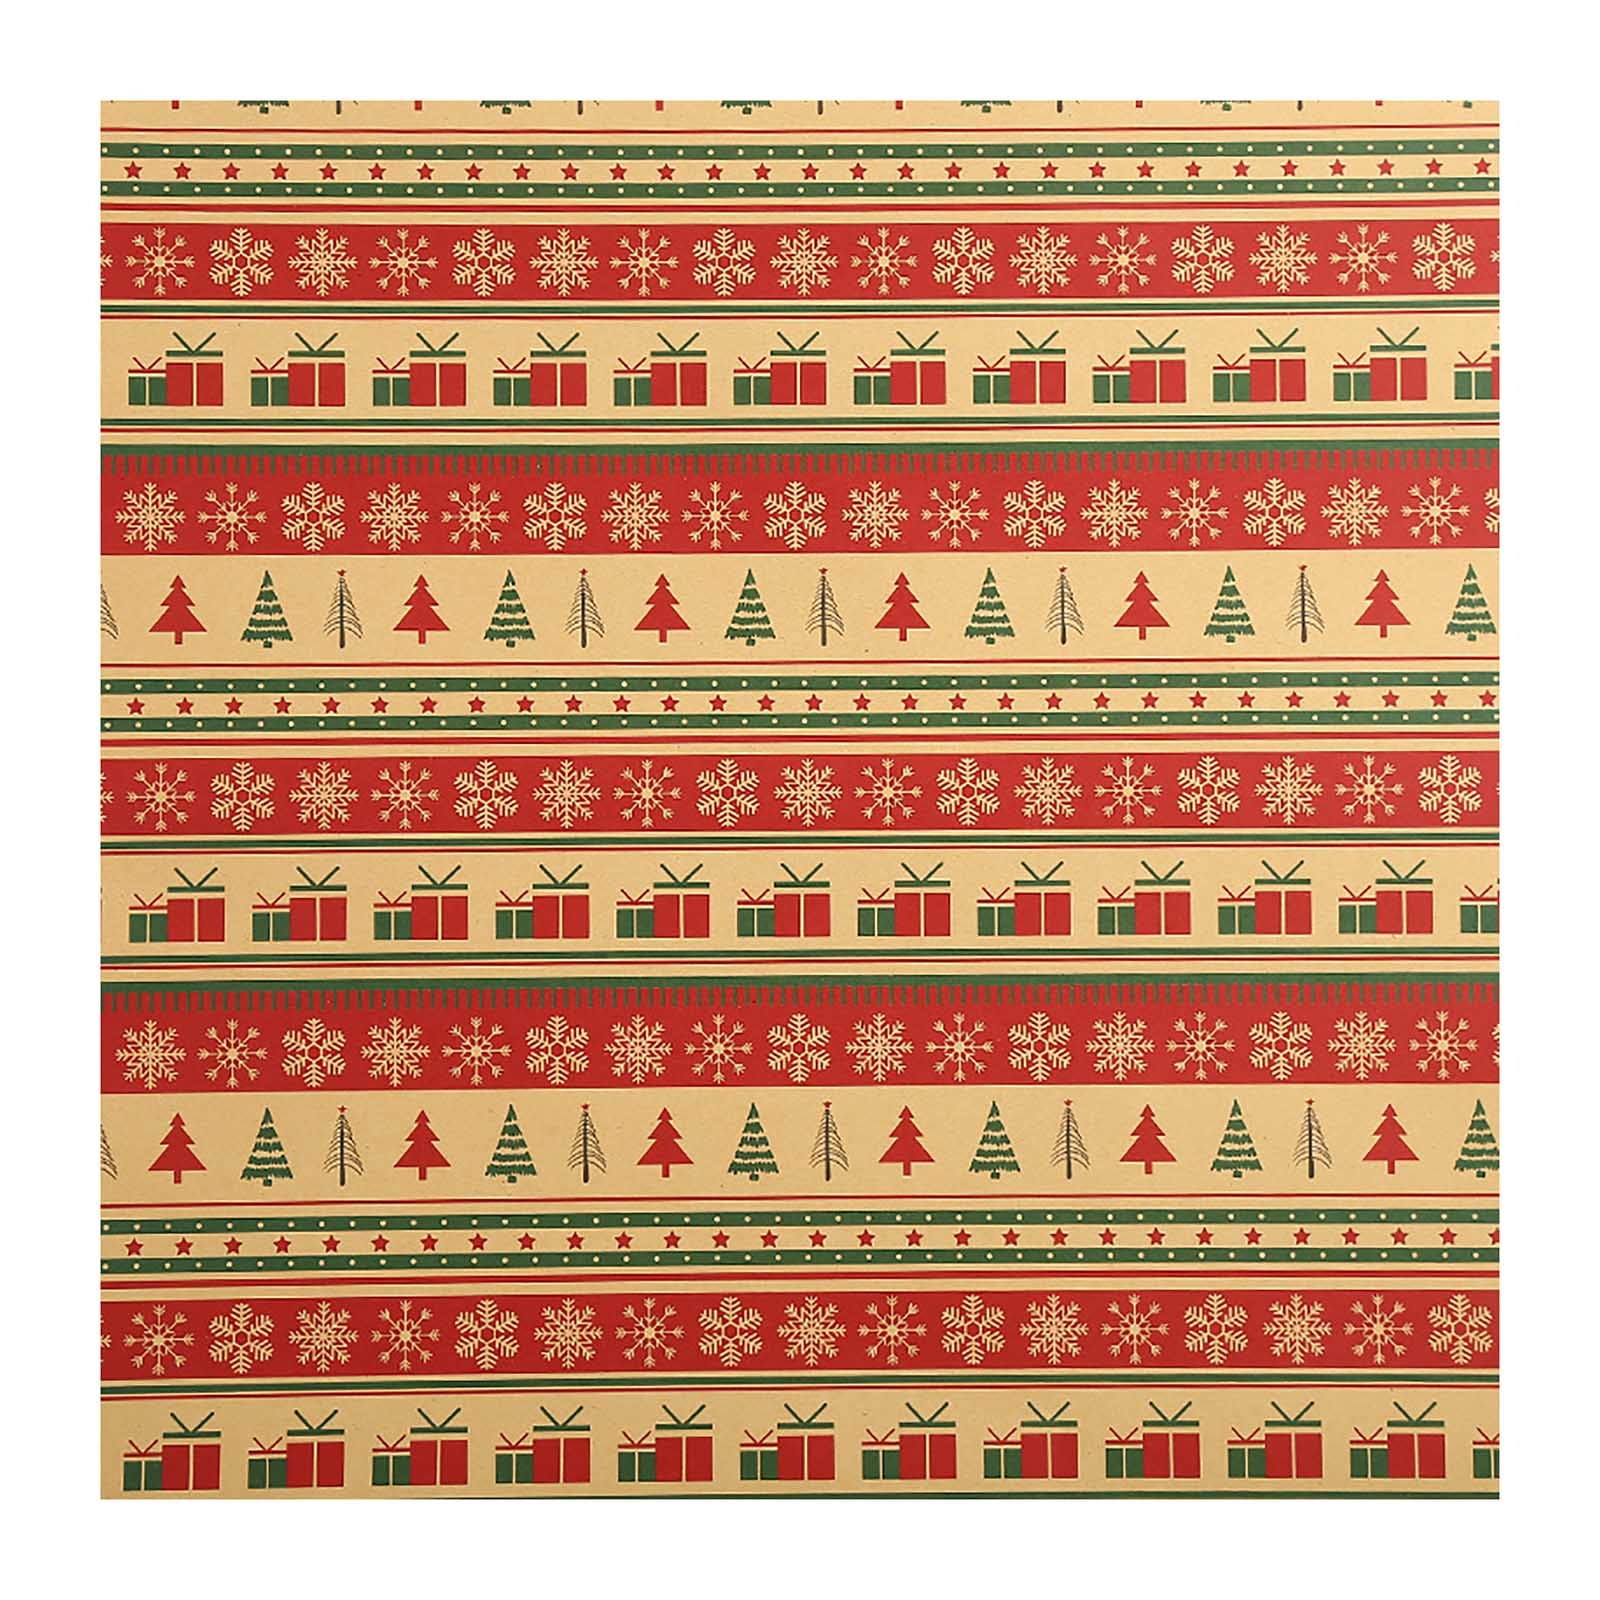 2DXuixsh Wrapping Paper 1Pc Diy Men's Women's Children's Christmas Wrapping  Paper Holiday Gifts Wrapping Truck Plaid Snowflake Green Tree Christmas  Design Snowflake Clear Gift Bags Christmas Brown 92 